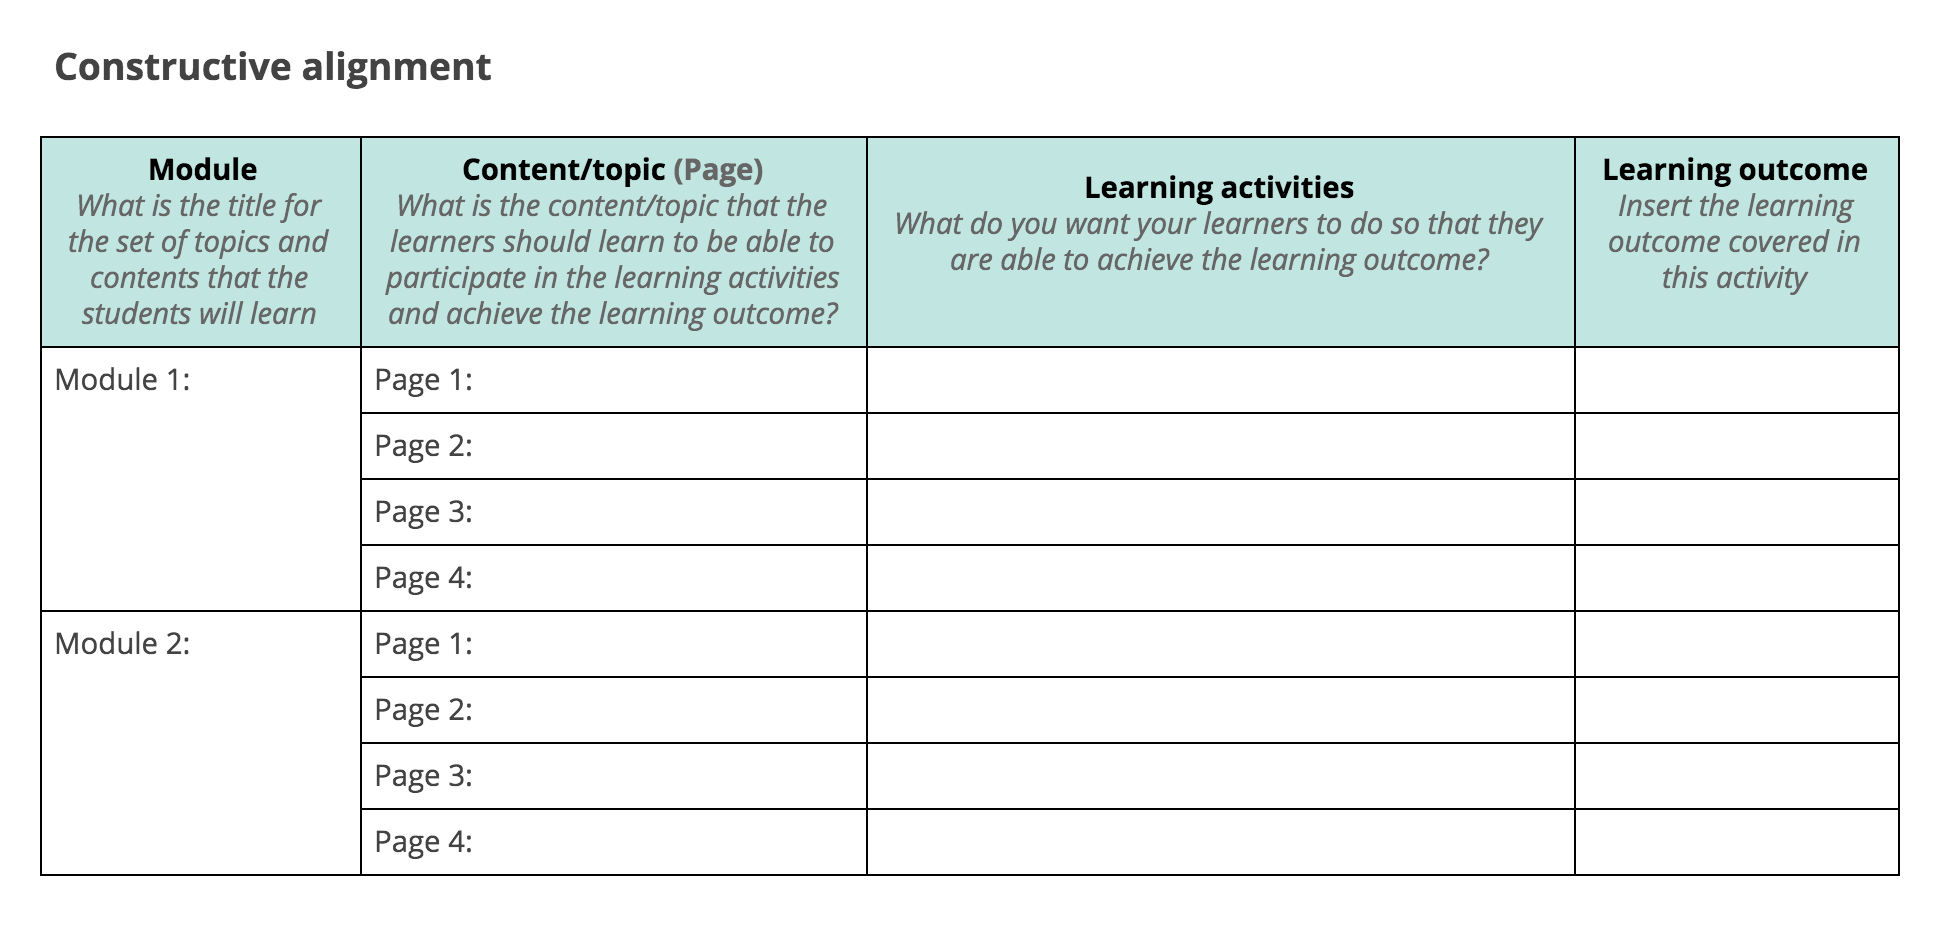 A Course Design Document showing constructive alignment, where modules and activities are connected to the actual course learning outcomes.